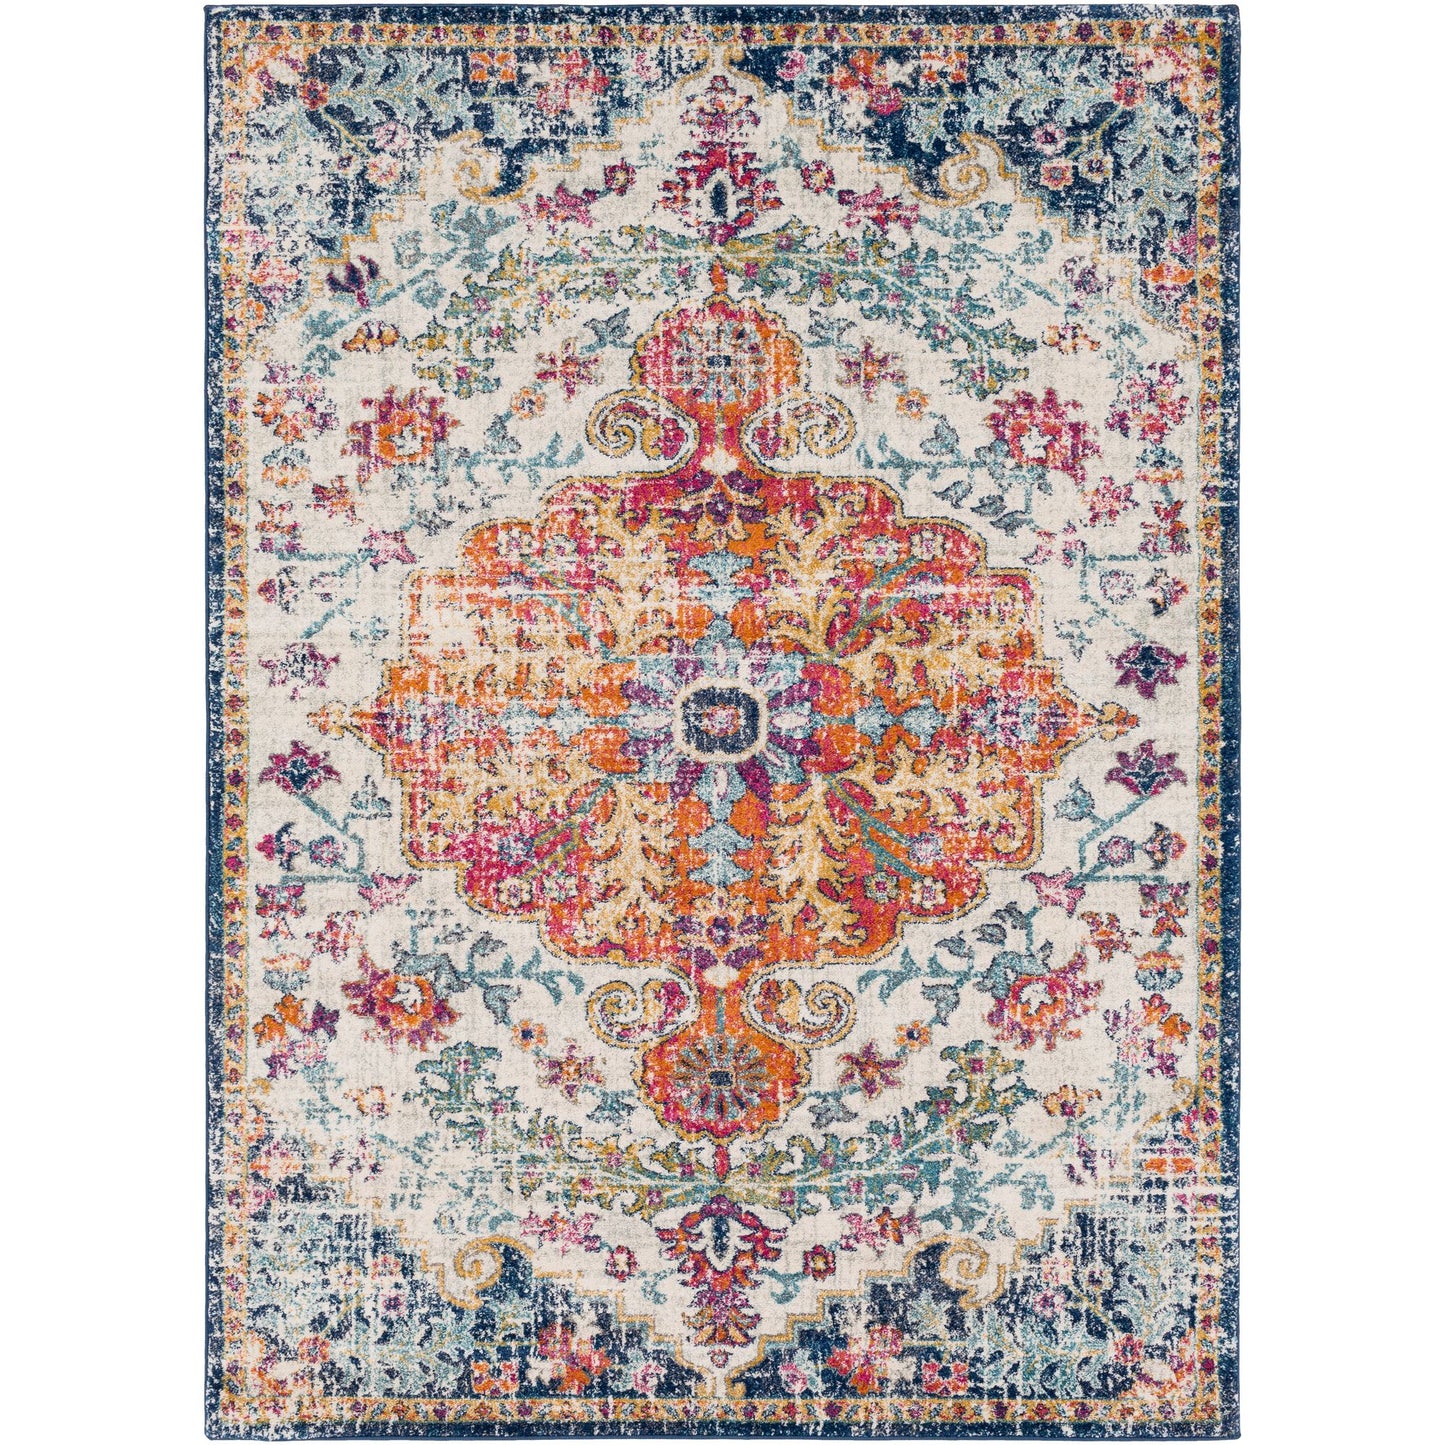 Art of Knot Sandhya Traditional Blue Area Rug; 5'3" x 7'3"